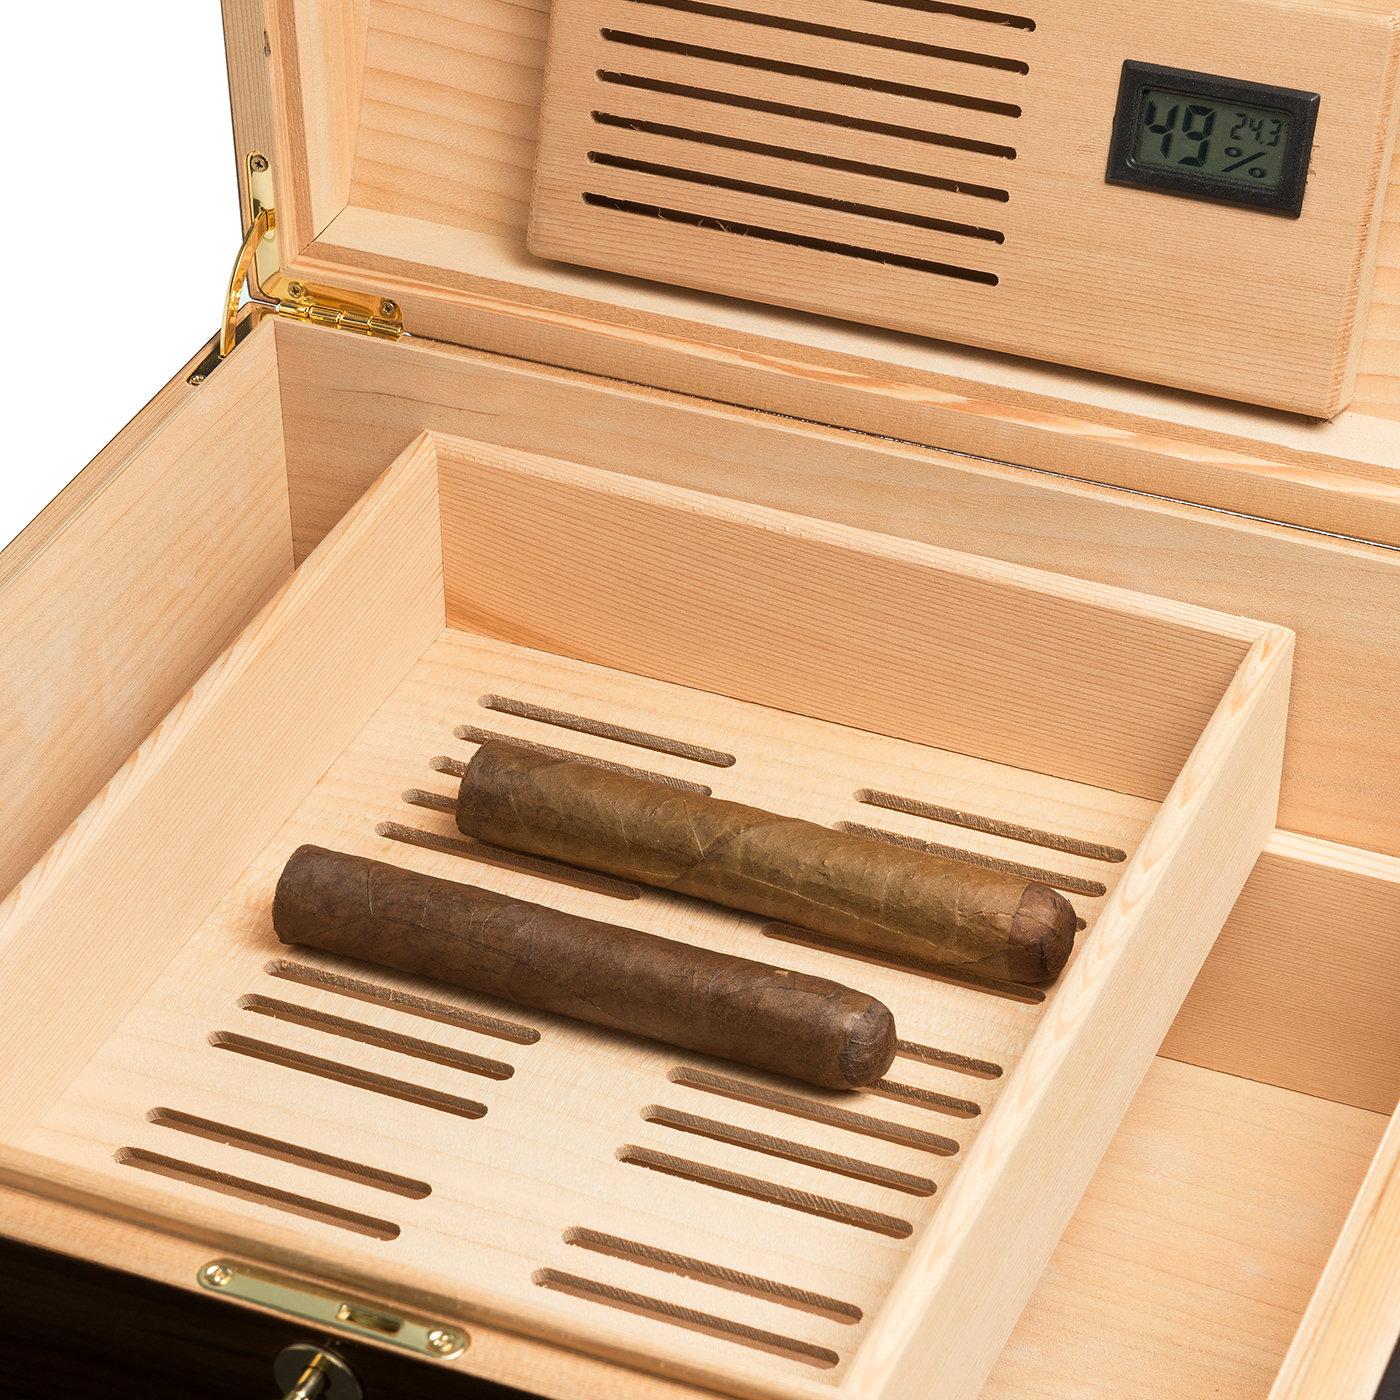 Showcasing magnificently shaded and luminous brown hues, this cigar case is superbly handcrafted of cedar veneered with rosewood. Holding up to 300 cigars, it is enriched with an exquisite metal key and is equipped with a hygrometer and a Boveda